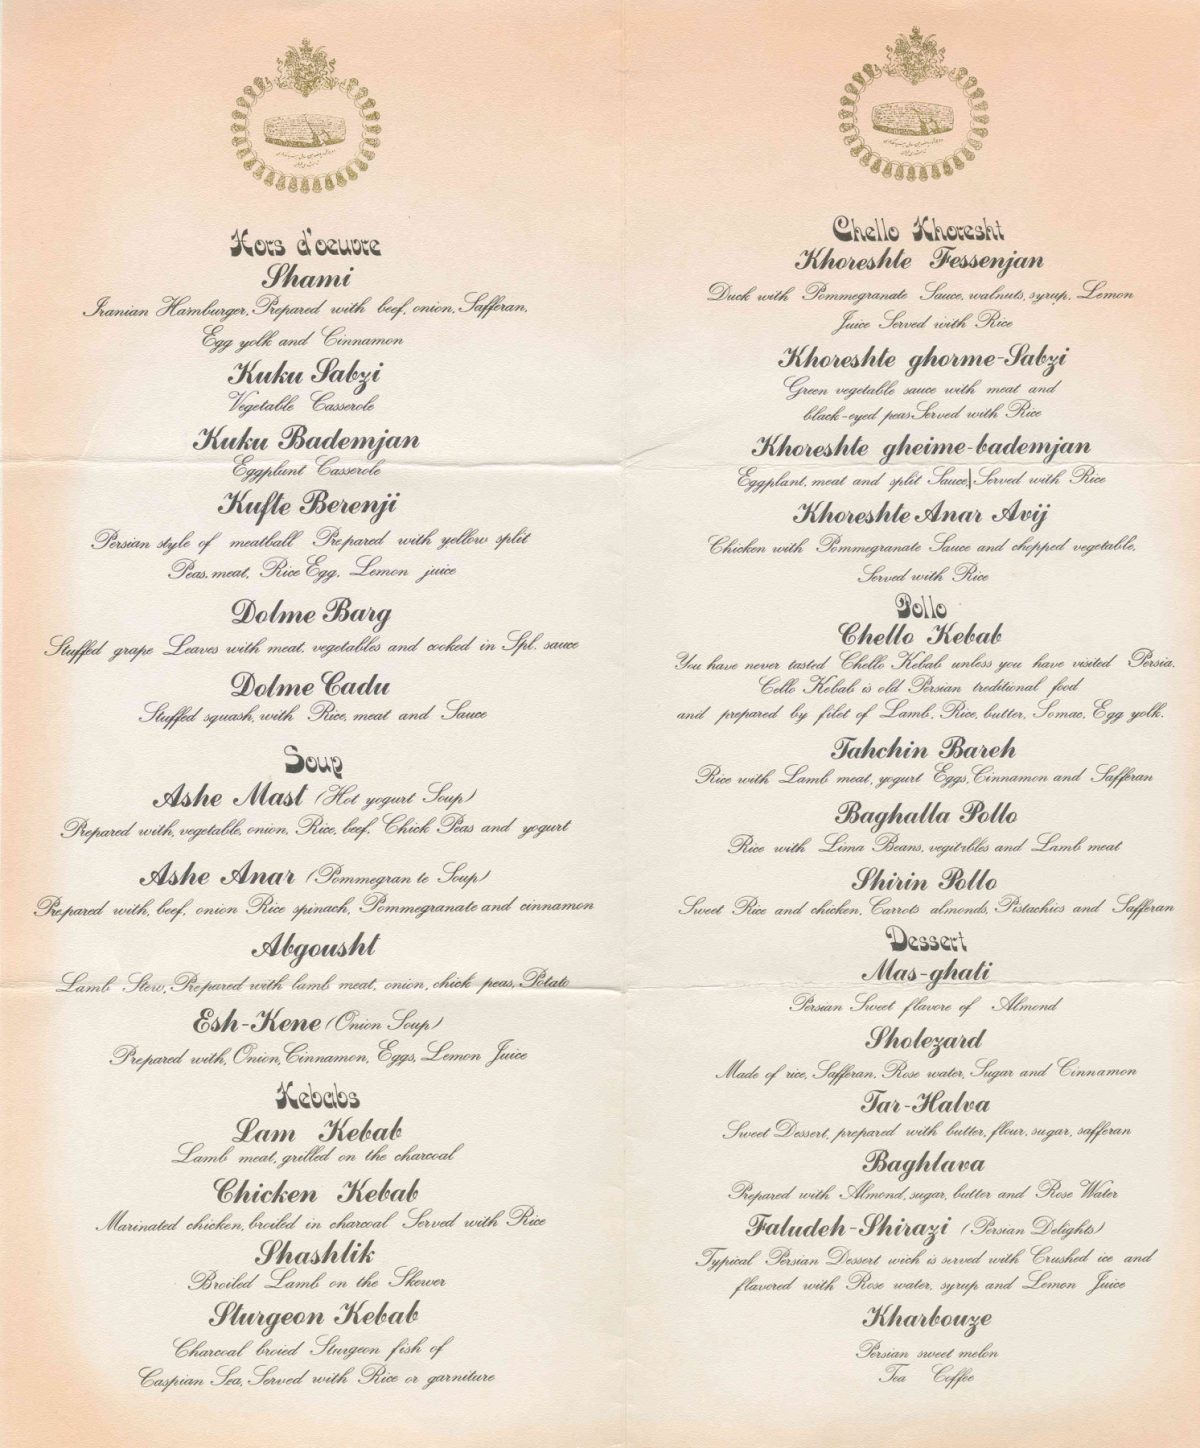 Menu in English and Persian for the dinner hosted by Shah of Iran at Persepolis on 15 October 1971 